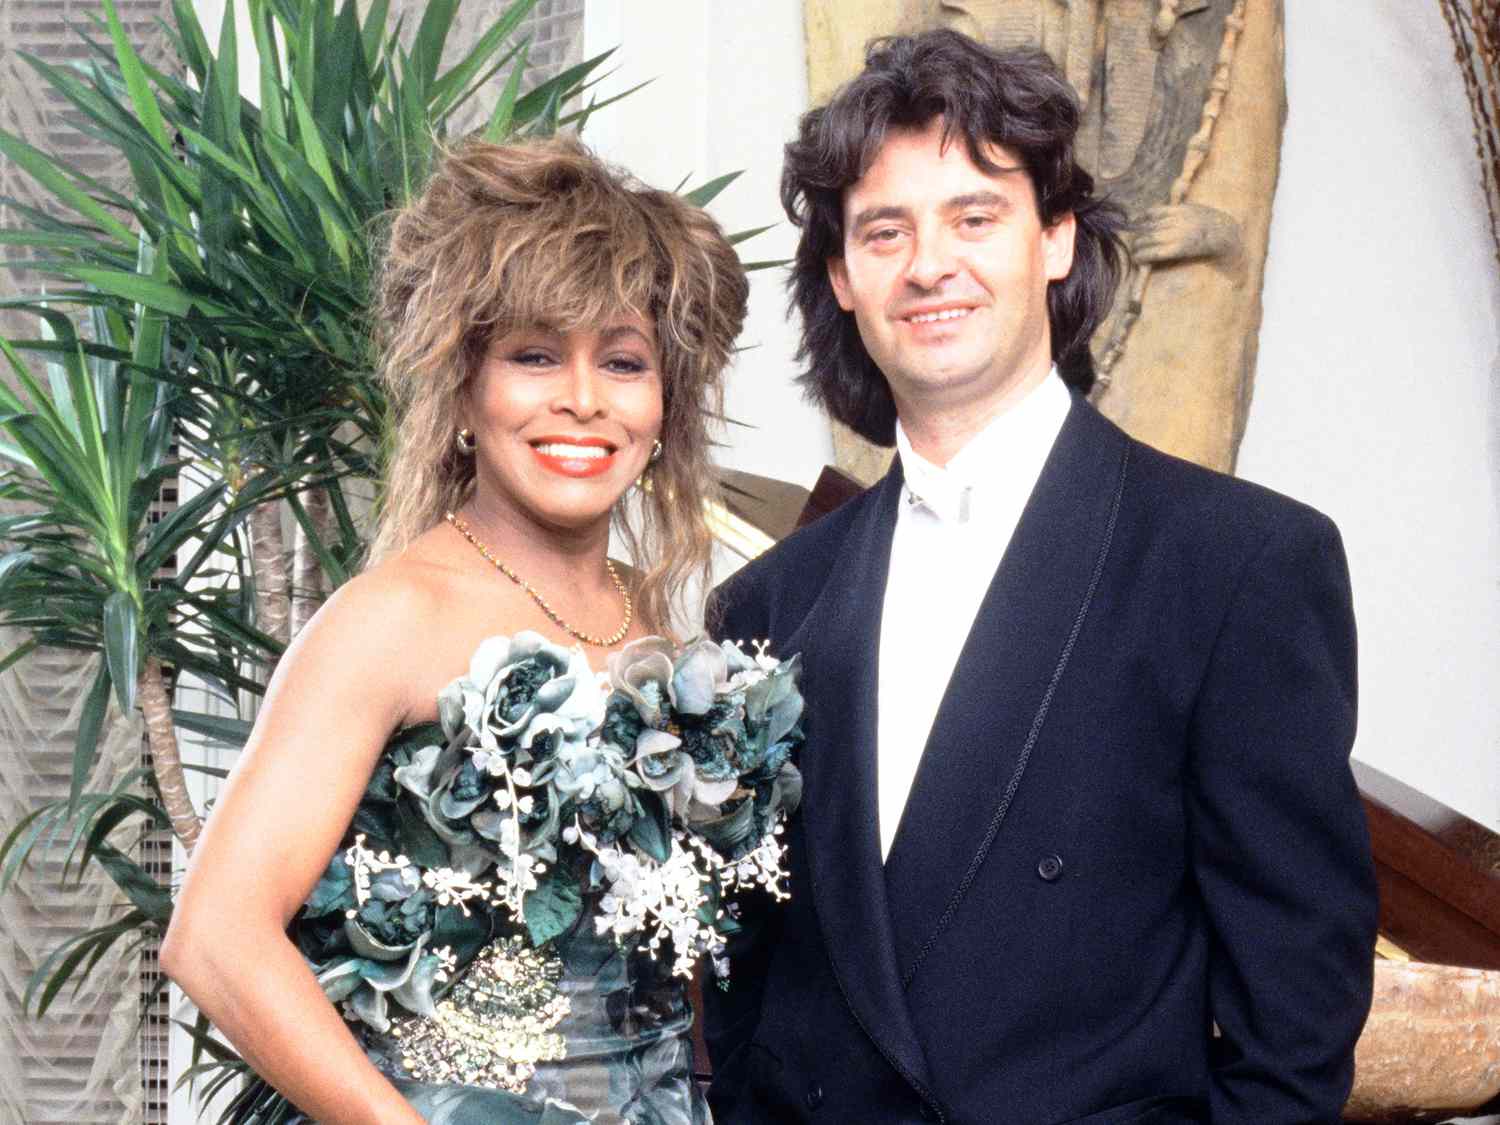 Tina Turner's Marriage to Erwin Bach 'Sustained' Her amid Struggles